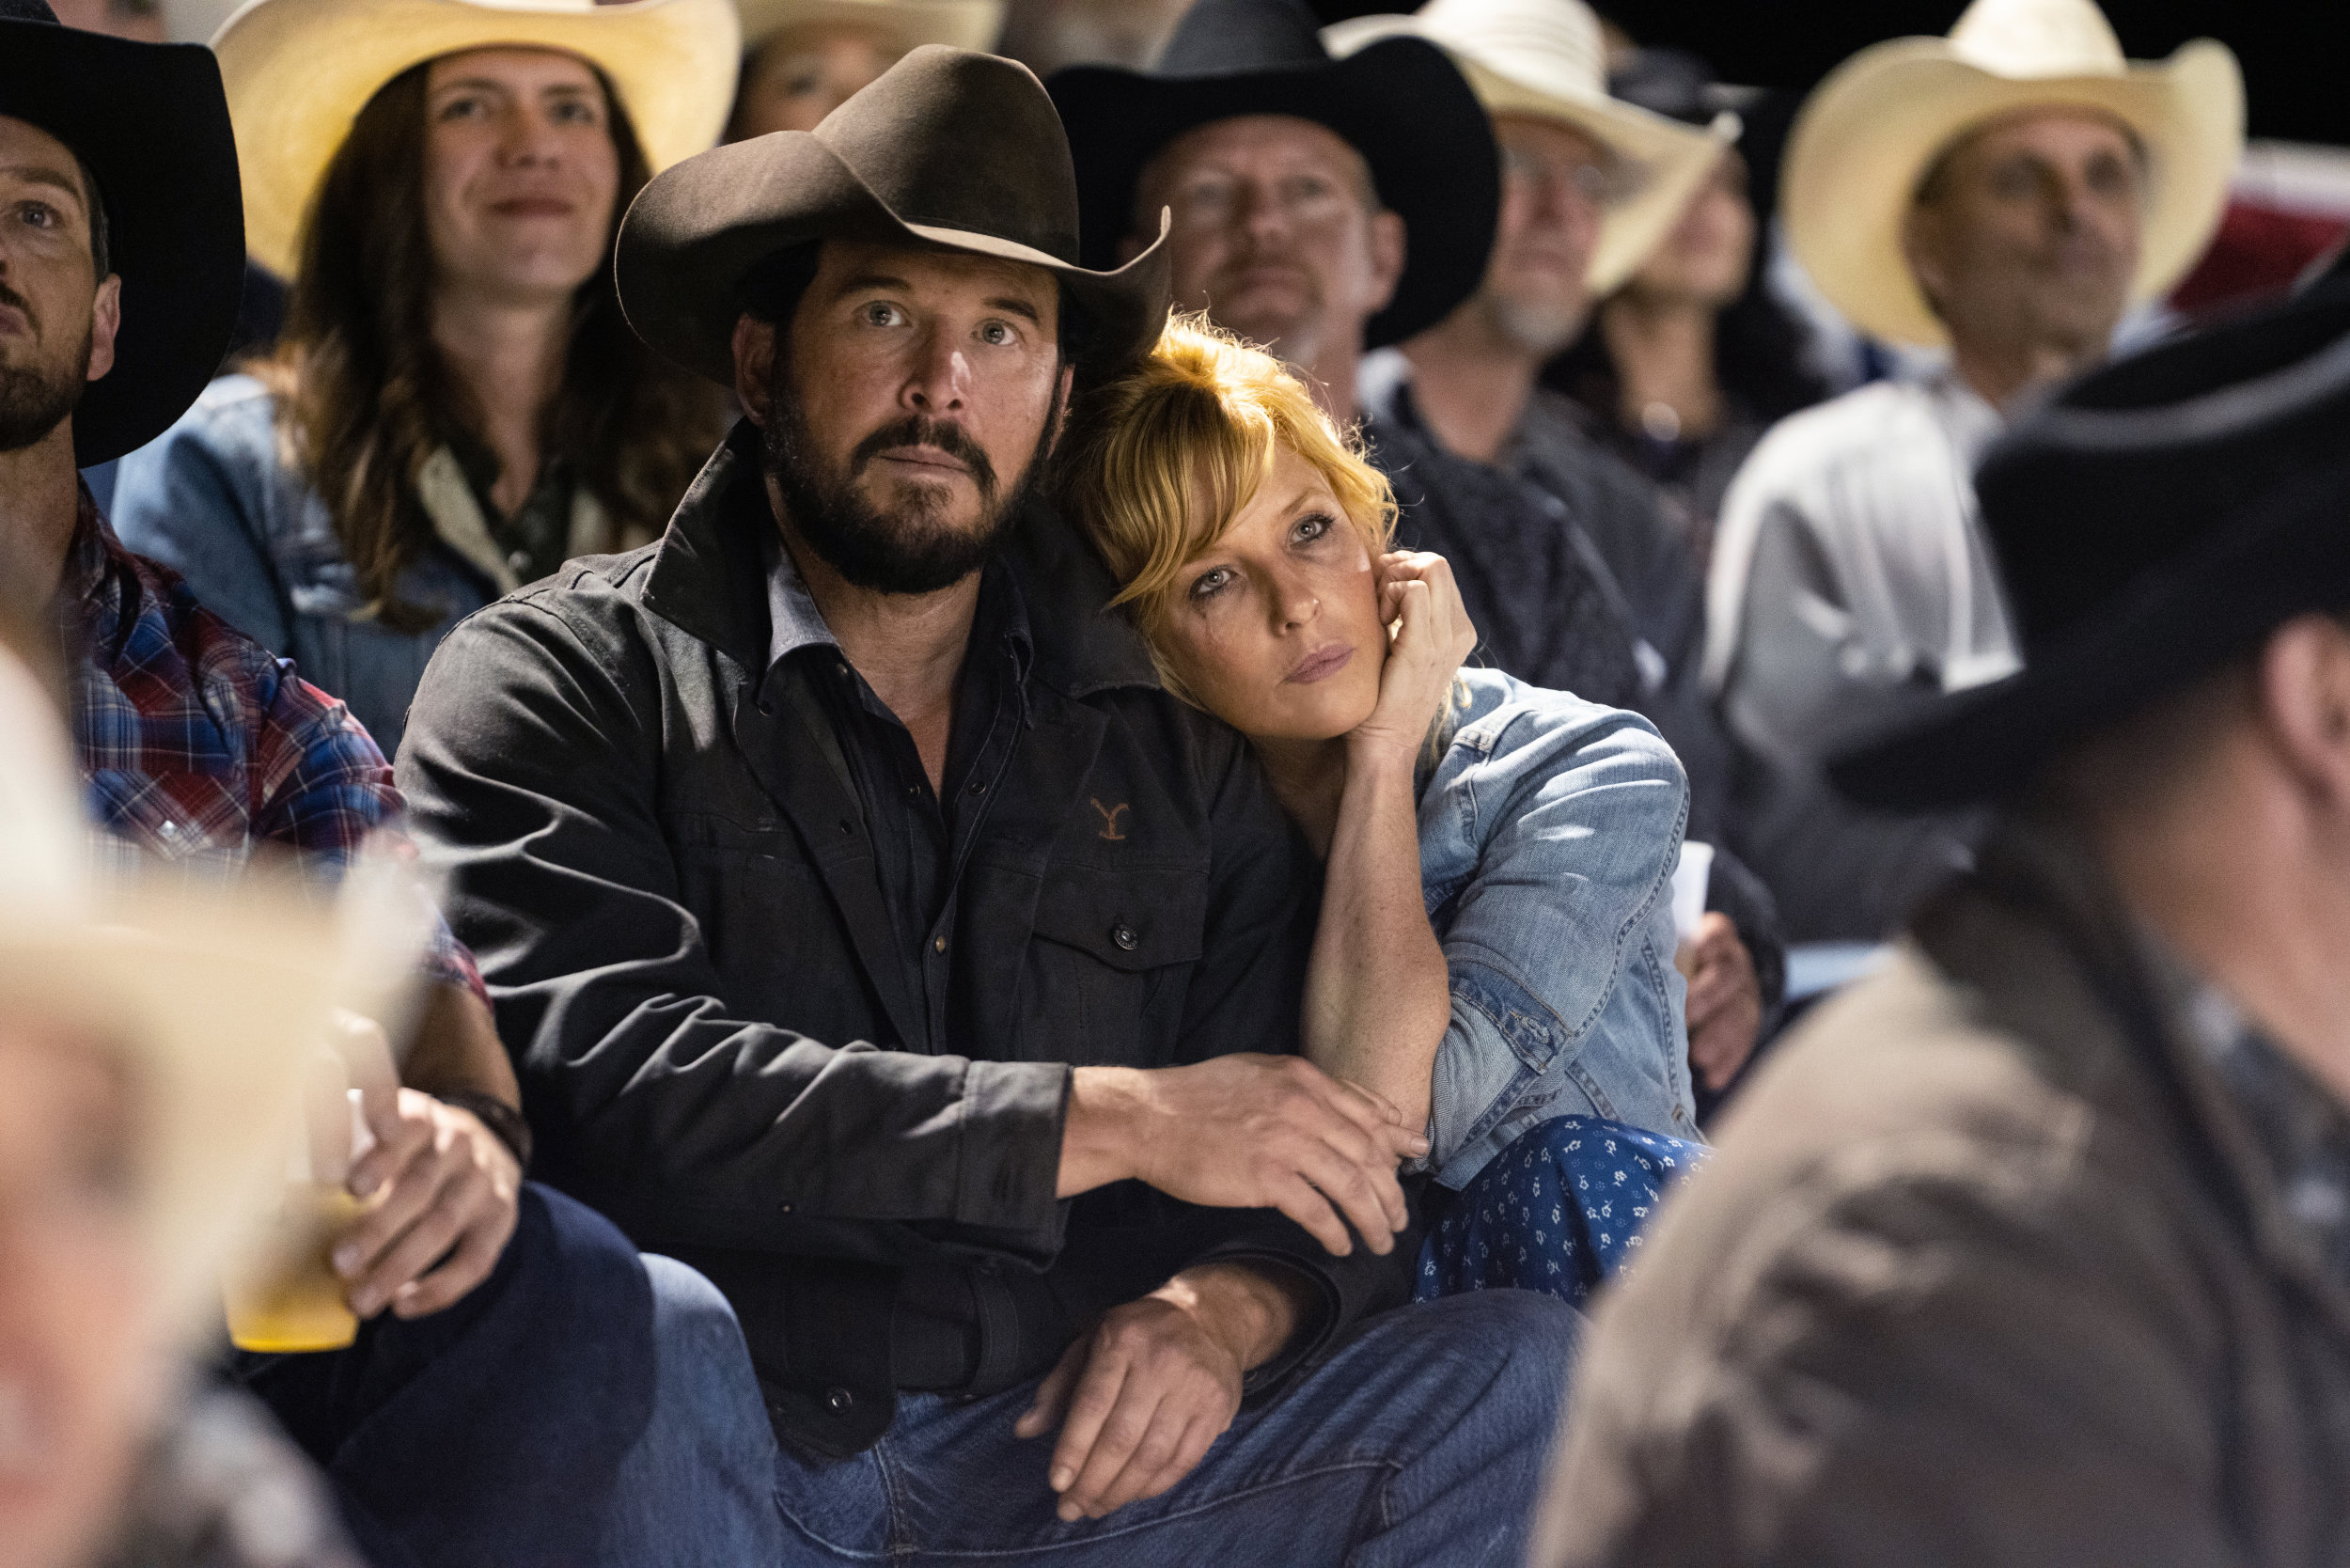 See Pictures From 'Yellowstone' Season 3, Episode 3 'An Acce...